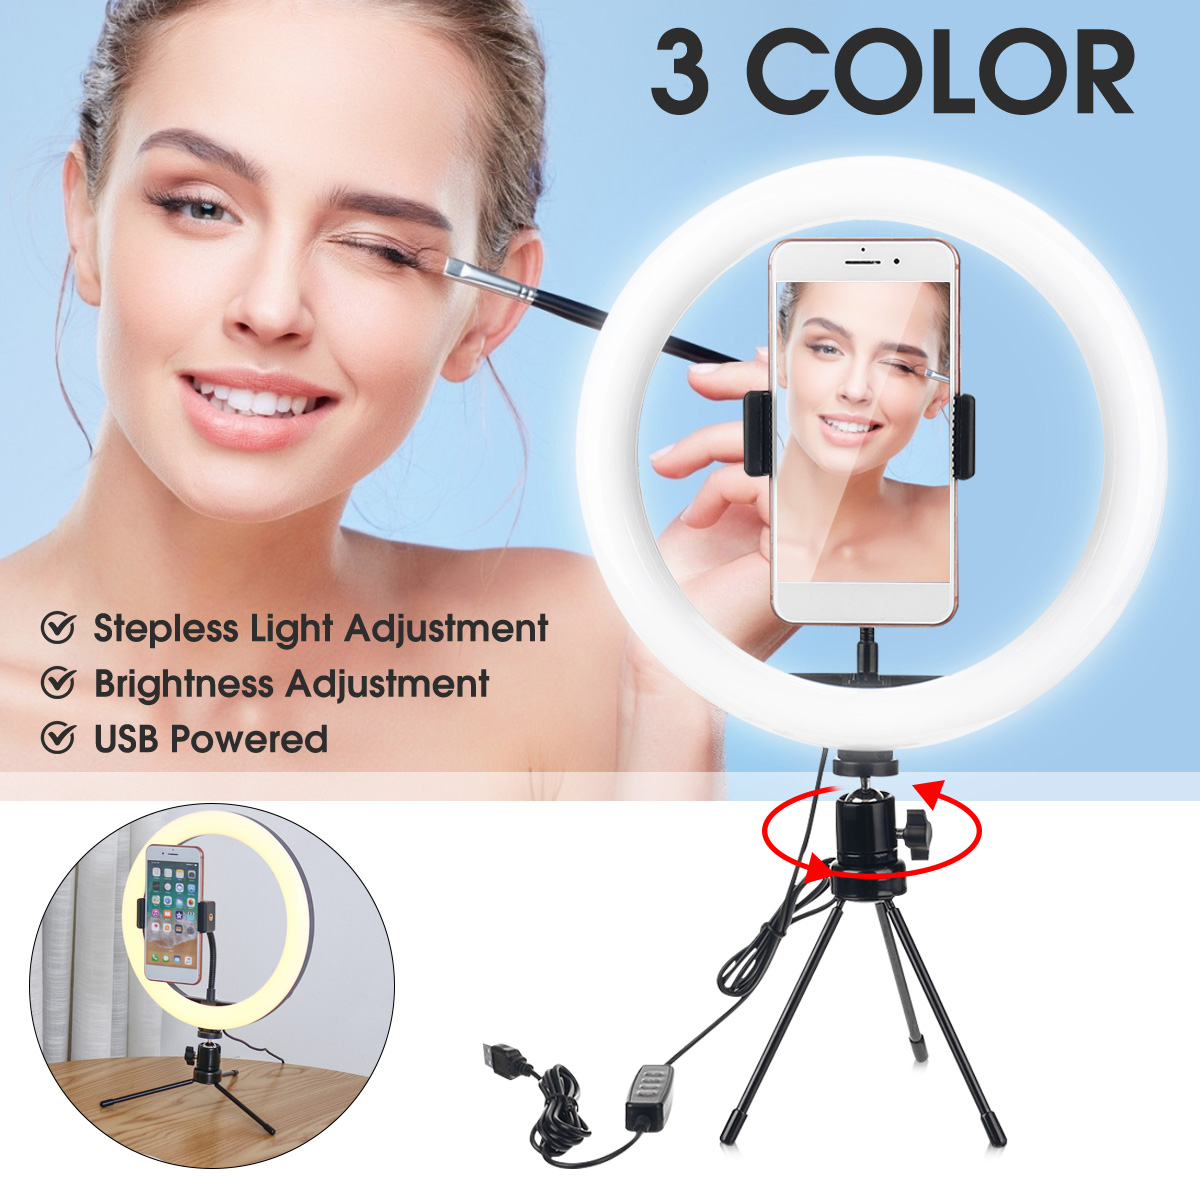 Dimmable-LED-Ring-Light-Lamp-18CM-26CM-Fill-Light-for-Makeup-Live-Stream-Selfie-Photography-Video-Re-1680025-2